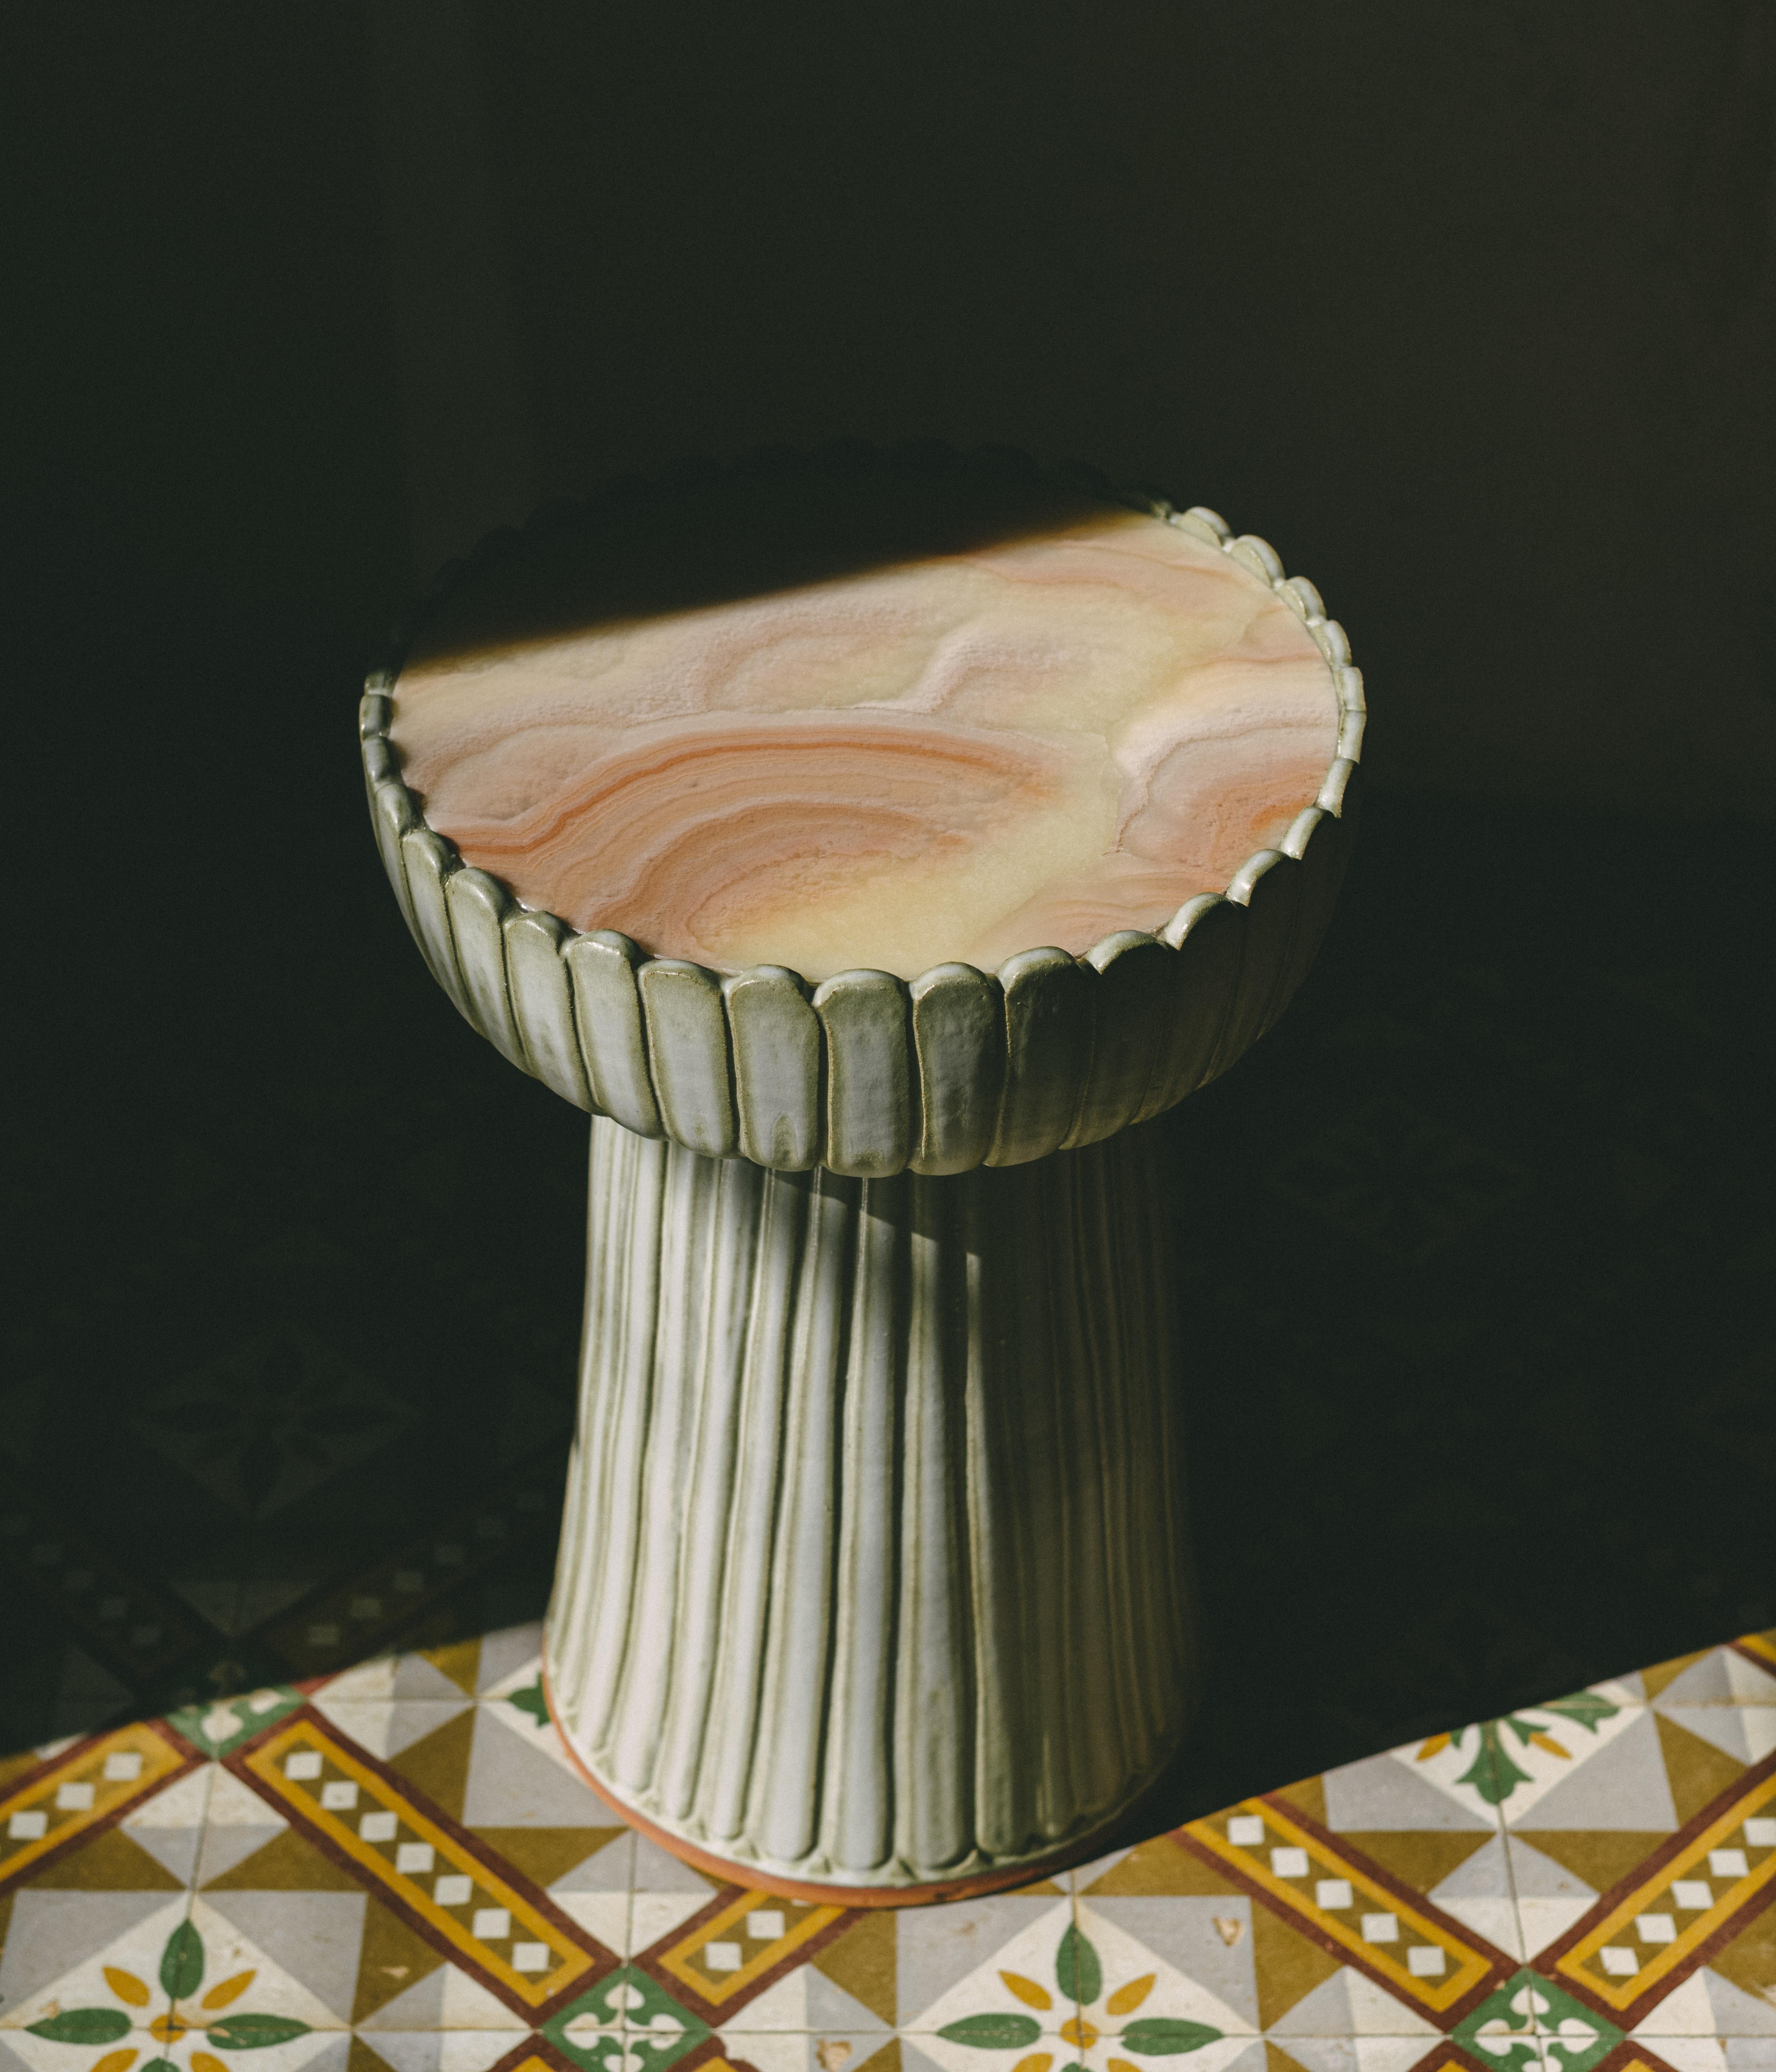 Clam Pink Onyx Auxiliary table by Casa Alfarera
Dimensions: D40.6 x H55.9 cm 
Materials: Petalite saturated, iridescent and irregular glaze

The Clam Auxiliary table is our latest creation in ceramic furniture. It is a continuation of Casa